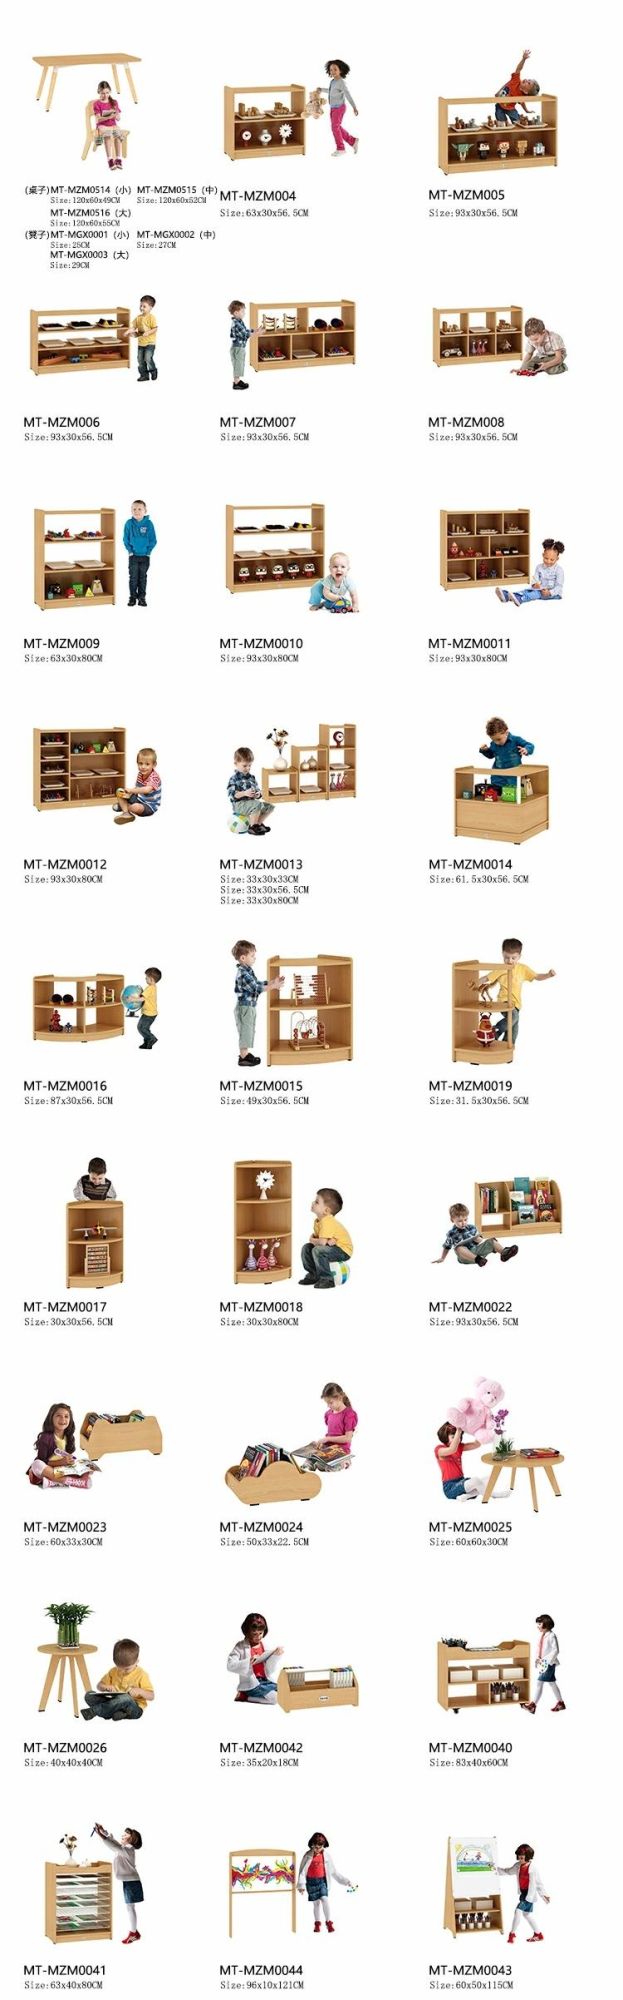 Cowboy Wooden Furniture Set Including Table and Chairs Cabinets for Preschool and Daycare